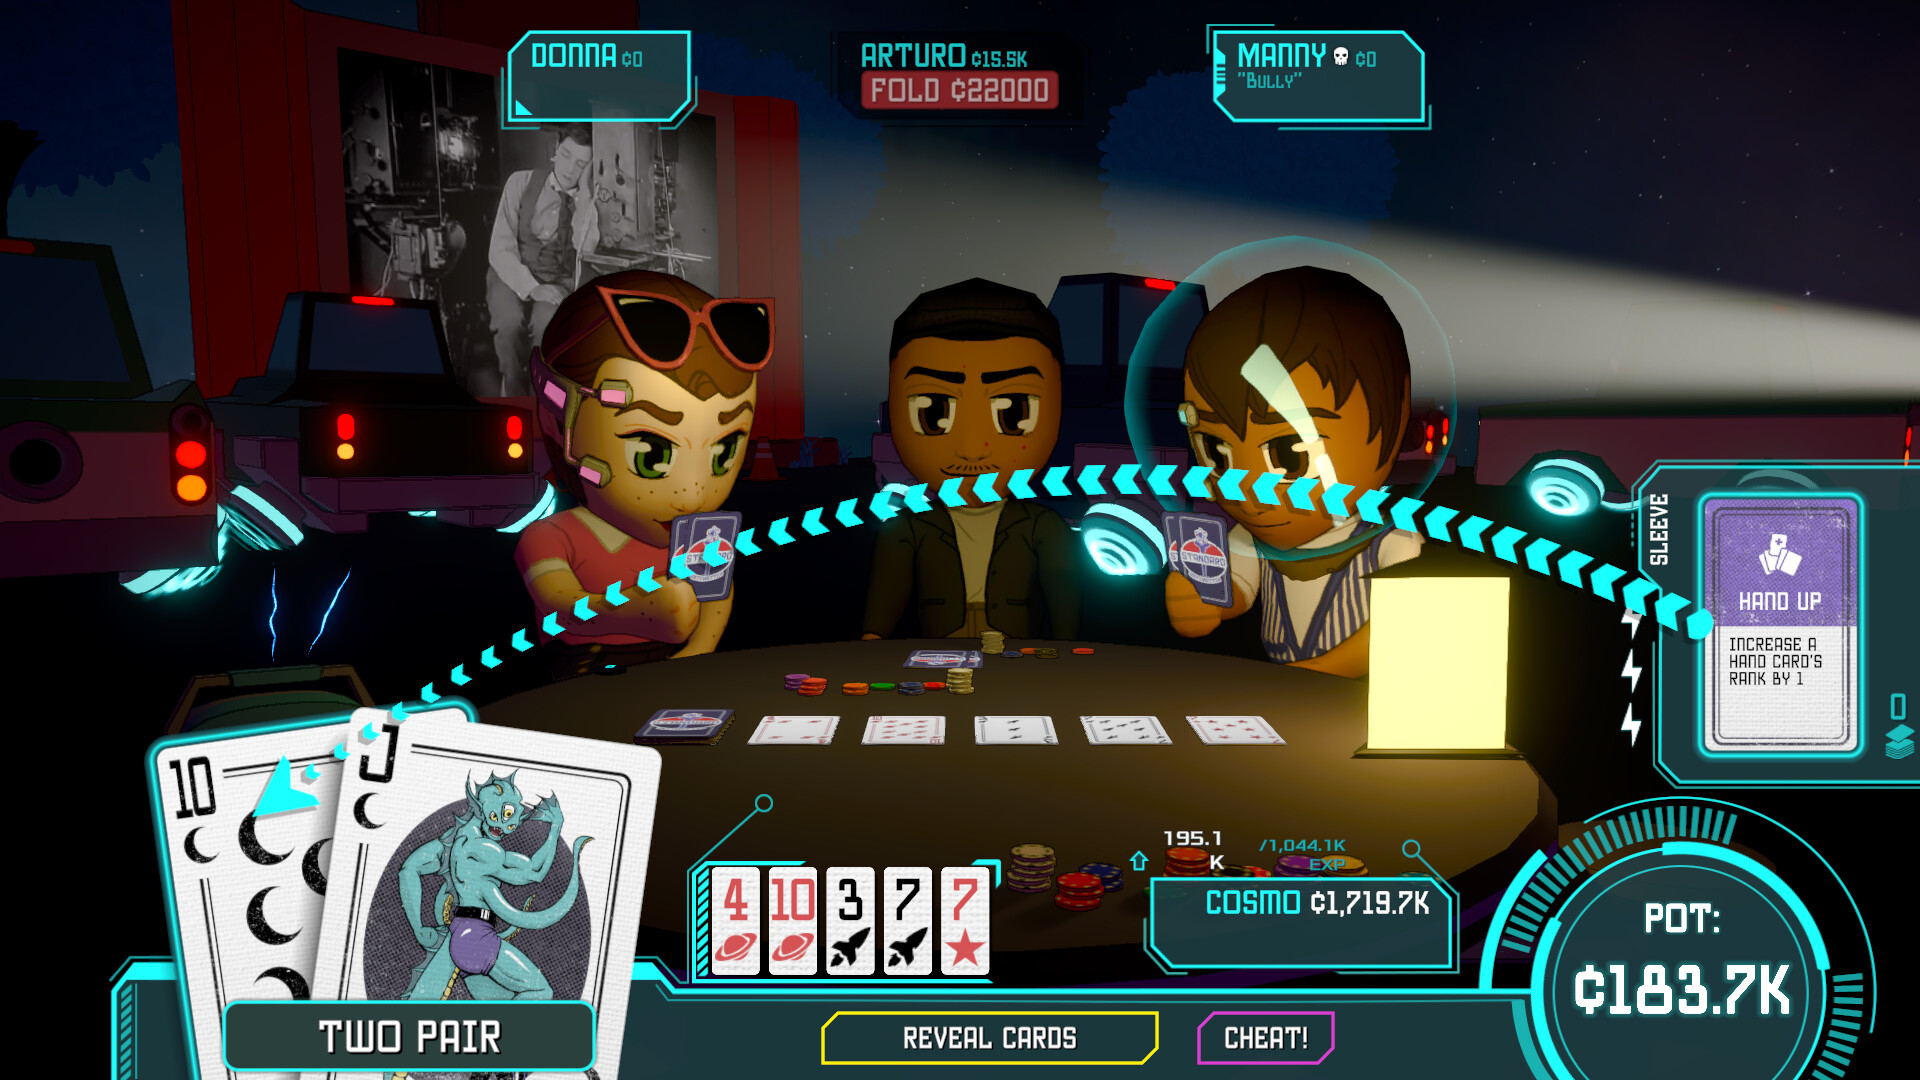 Cosmo Cheats at Poker Steam CD Key 5.54$